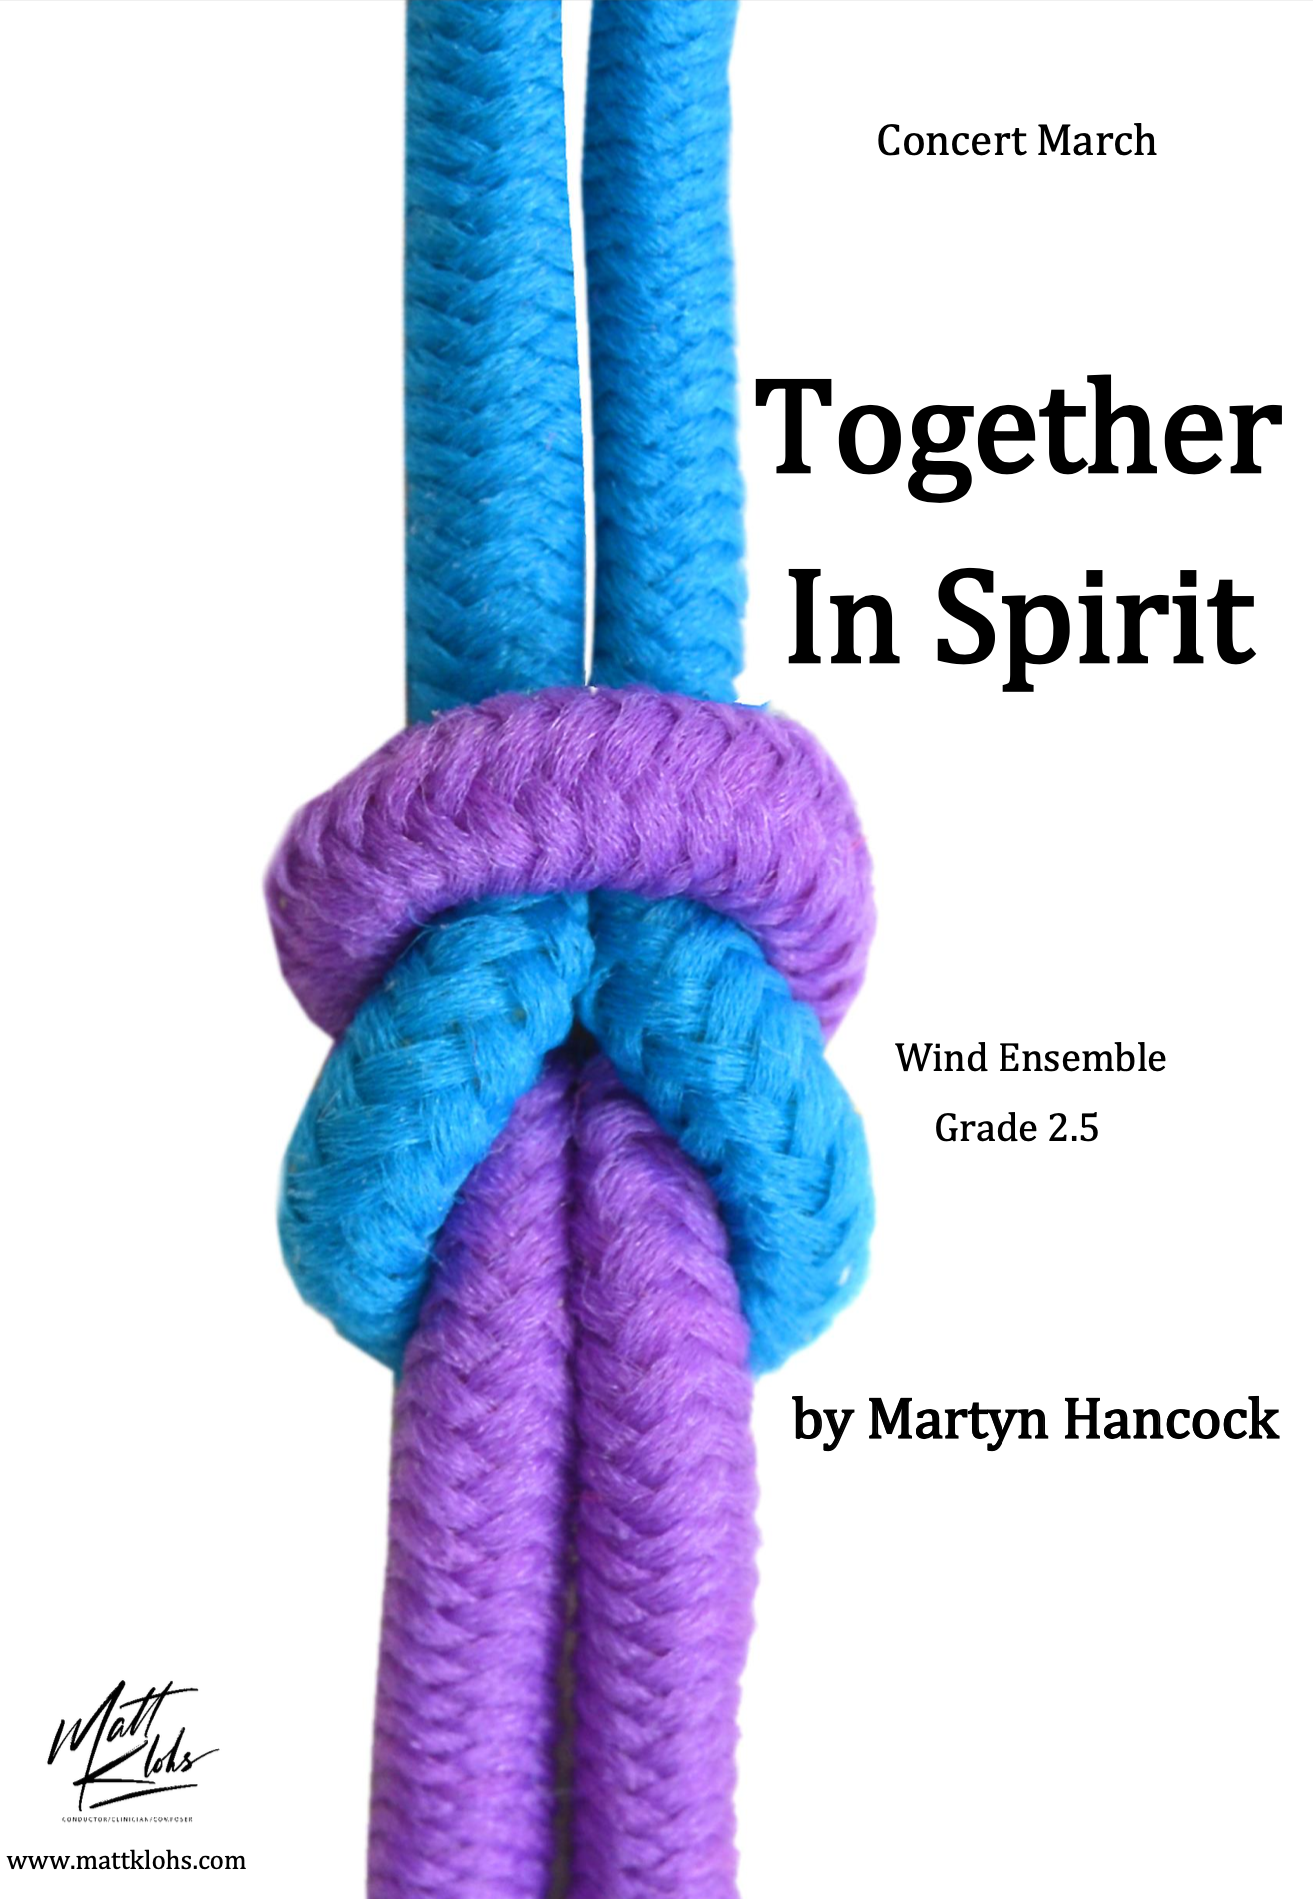 Together In Spirit by Martyn Hancock